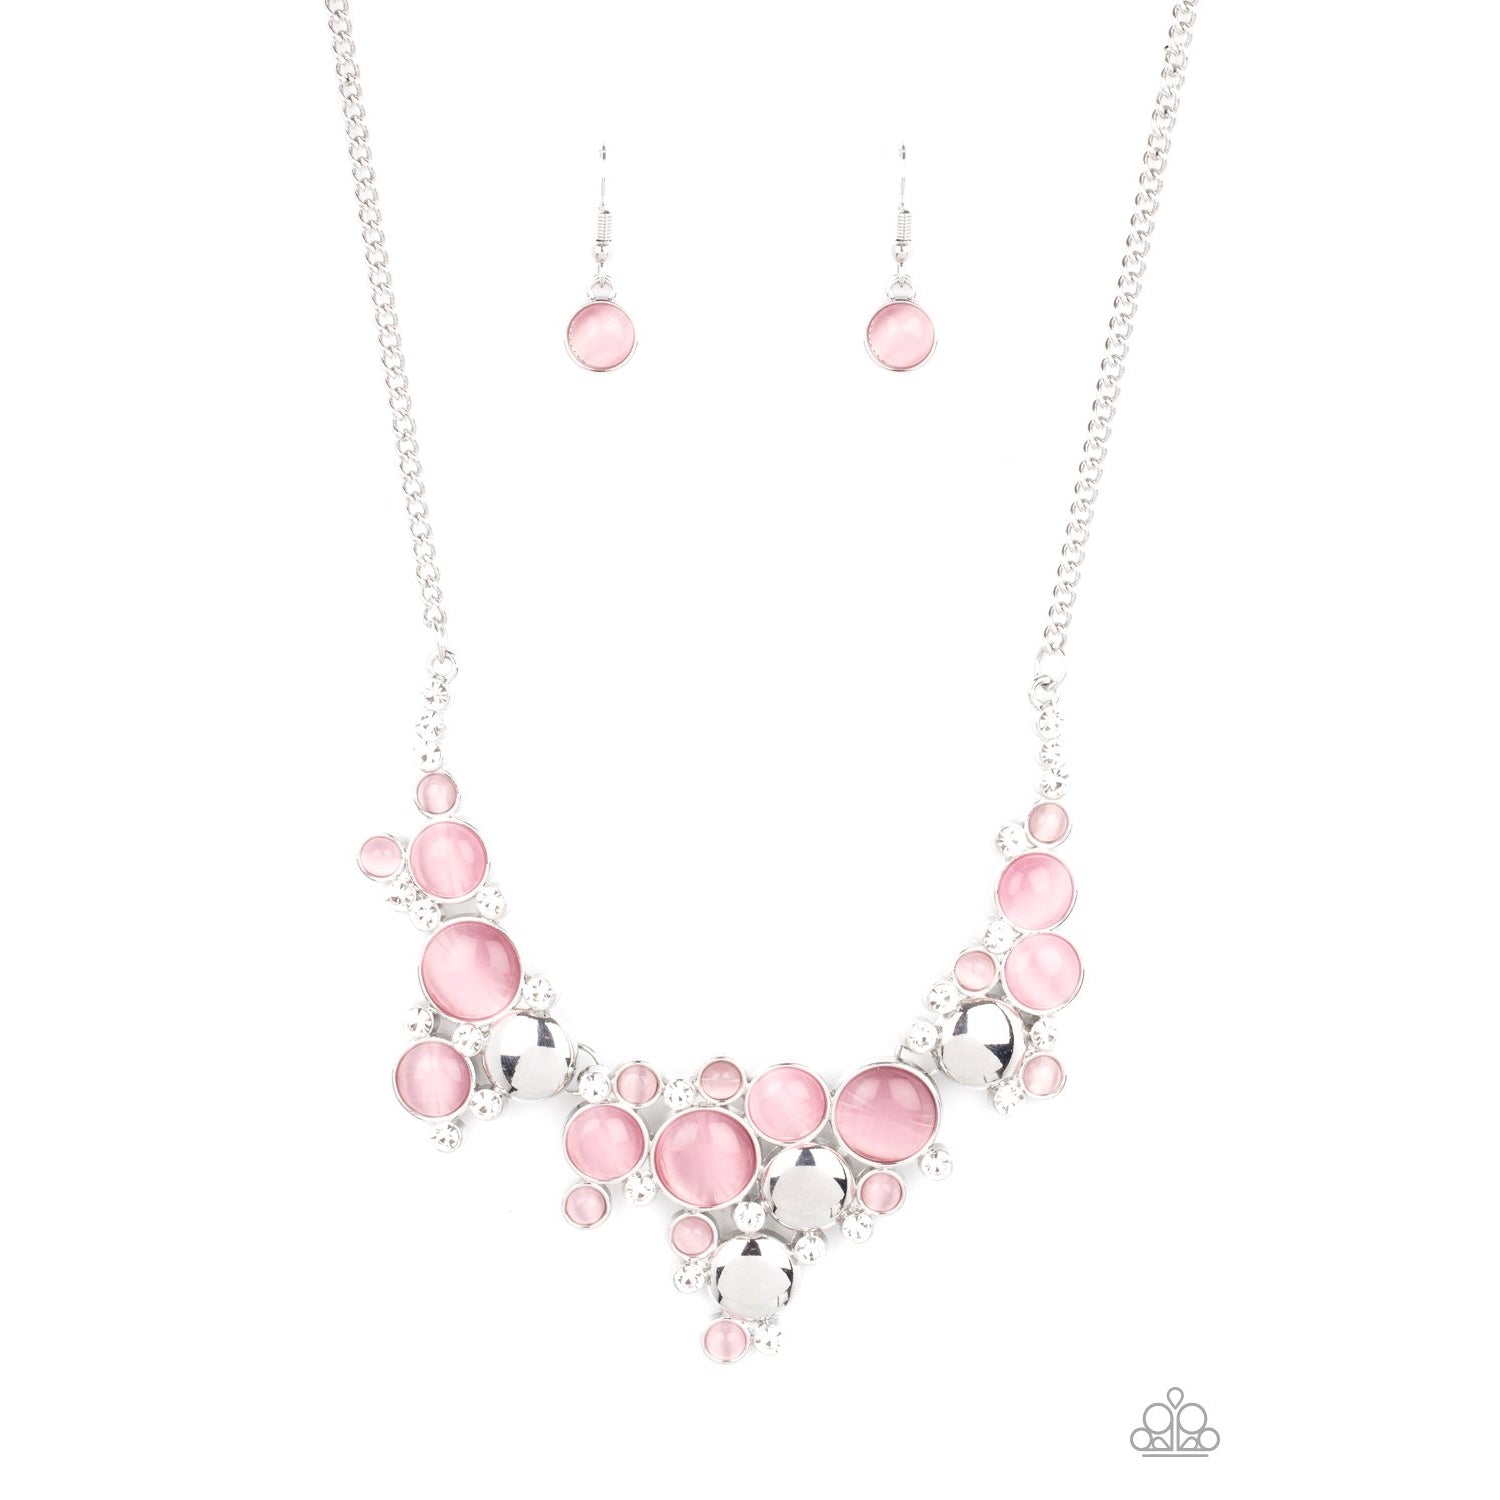 Fairytale Affair - Pink Cat's Eye Necklace - Paparazzi Accessories - GlaMarous Titi Jewels